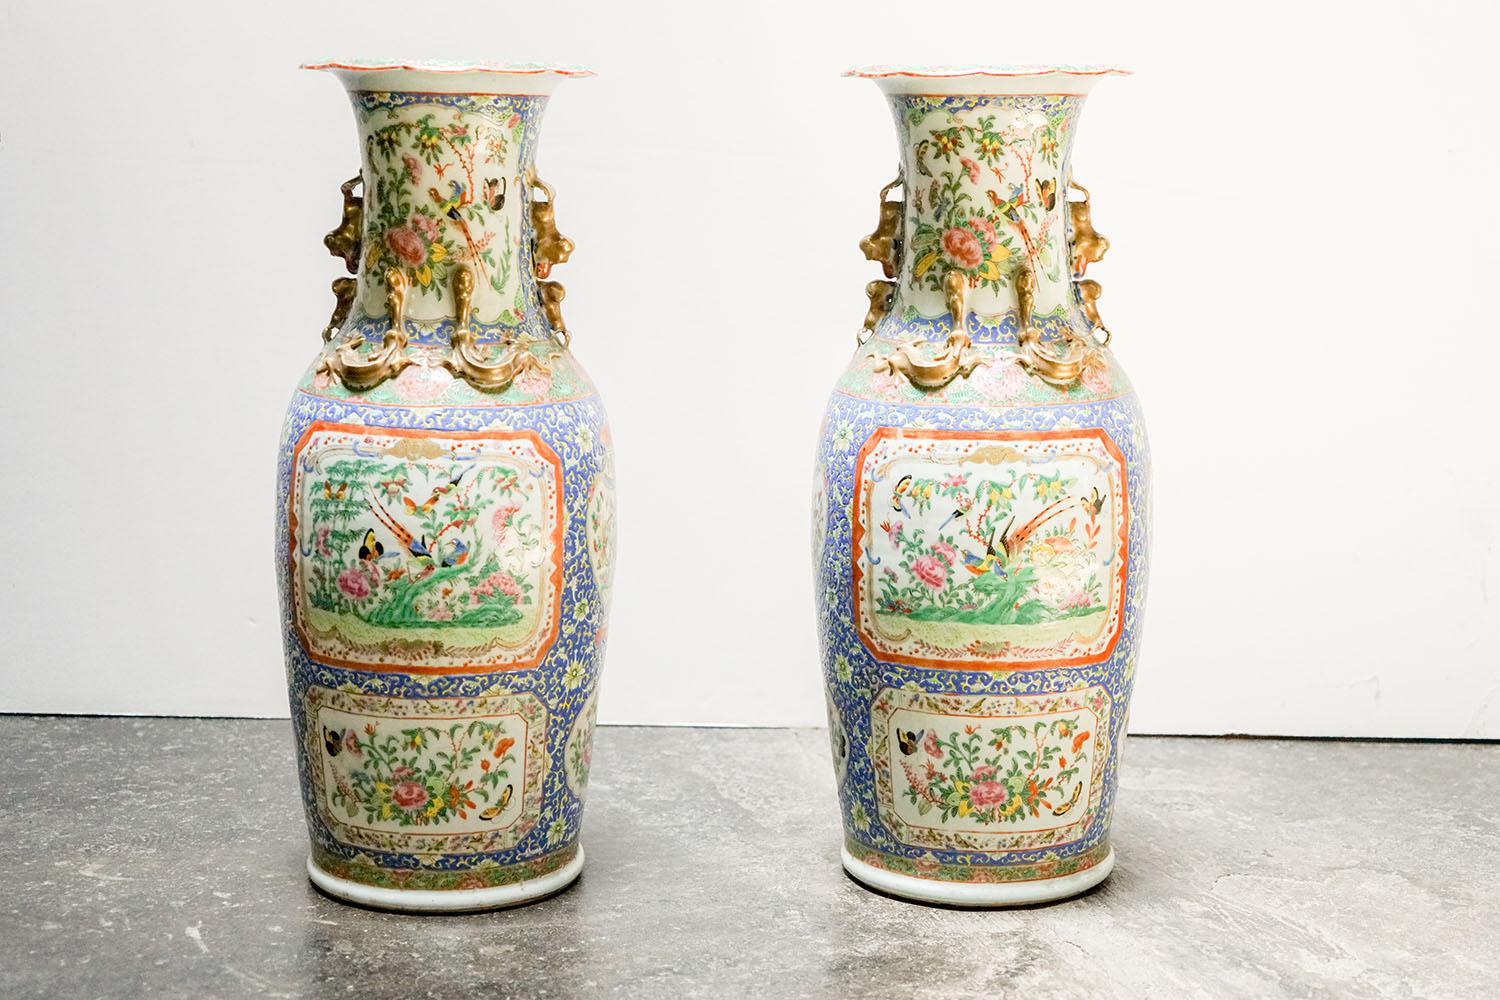 Pair of large Chinese porcelain rose canton vases, circa. late 1800s.